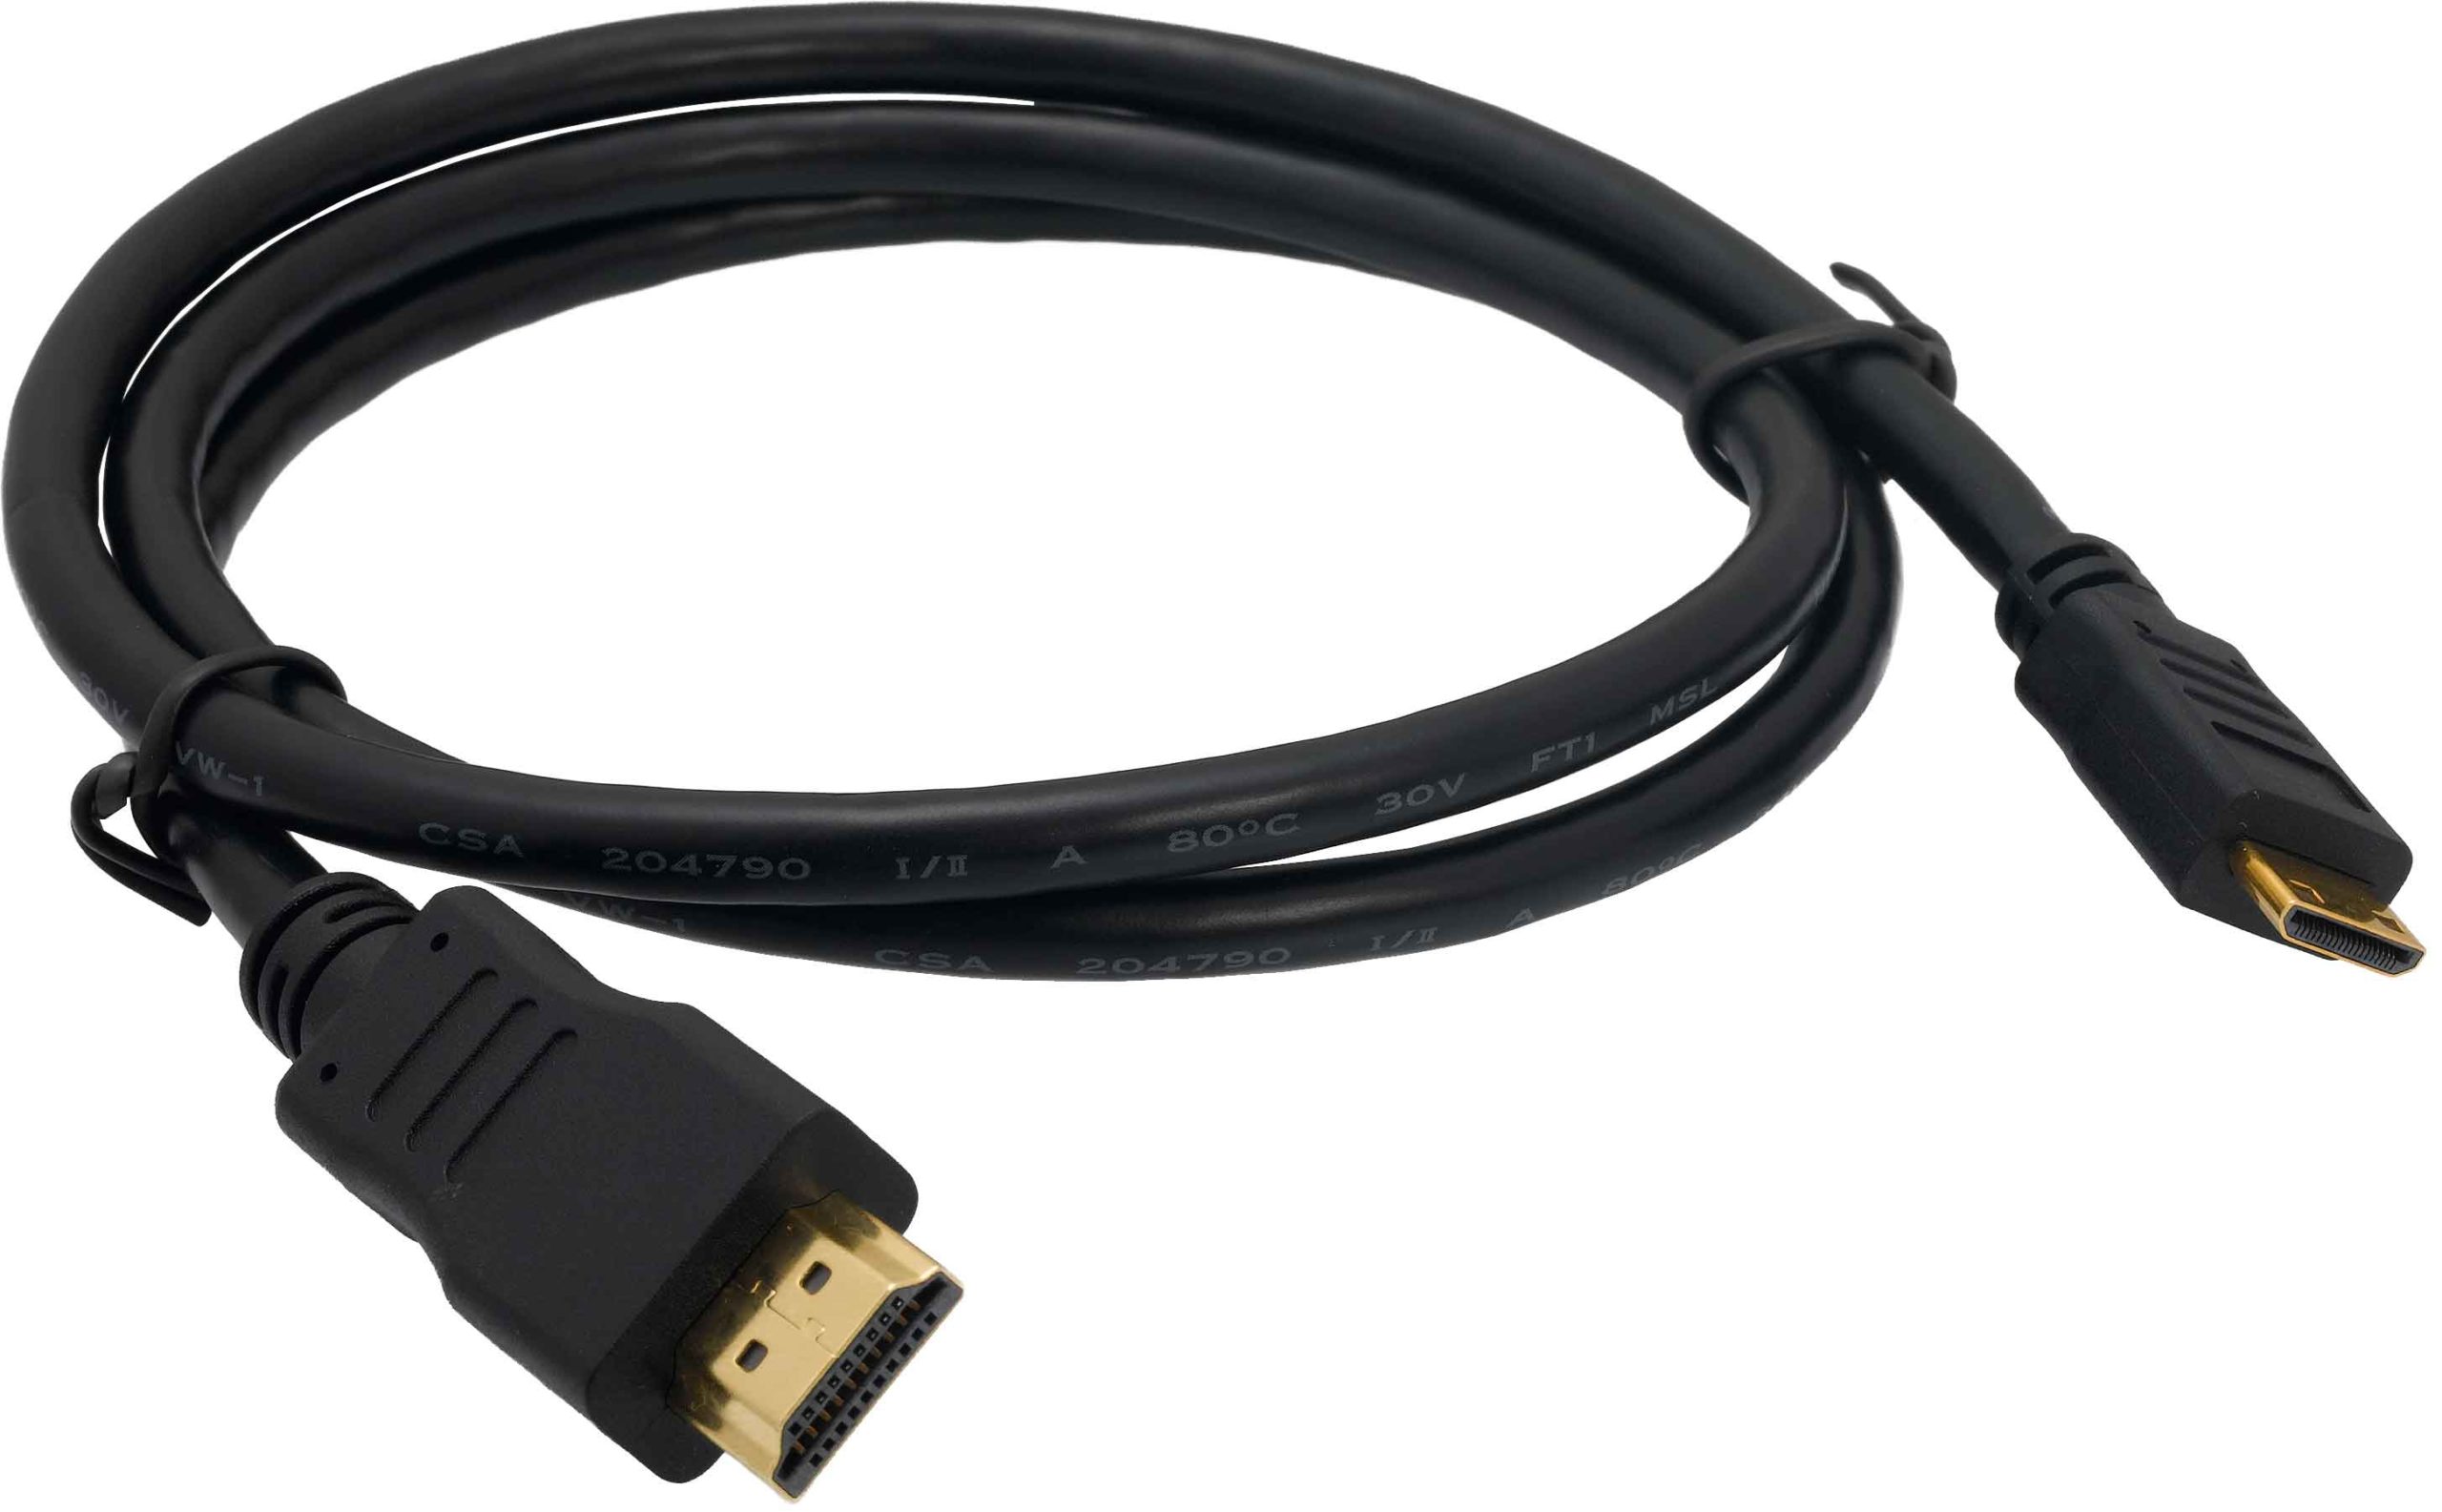 CABLE HDMI 5 MTS NORMAL